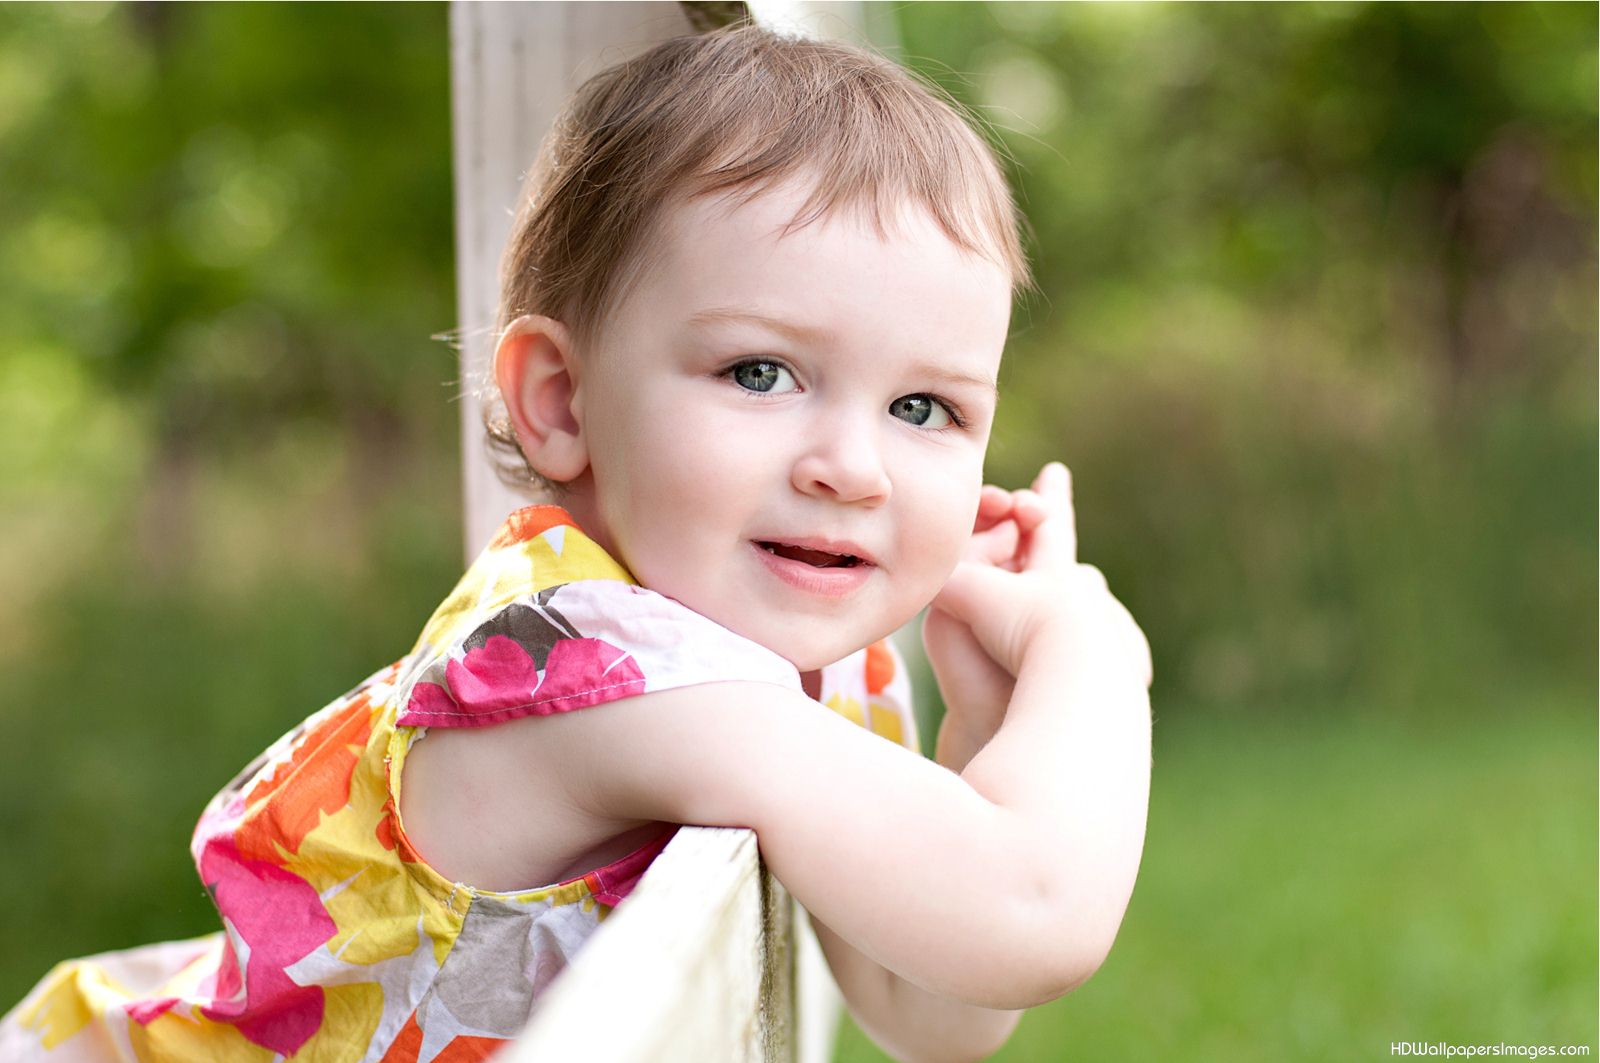 Smiling Baby Girl With Green Eyes - Beautiful Baby Images Hd - HD Wallpaper 